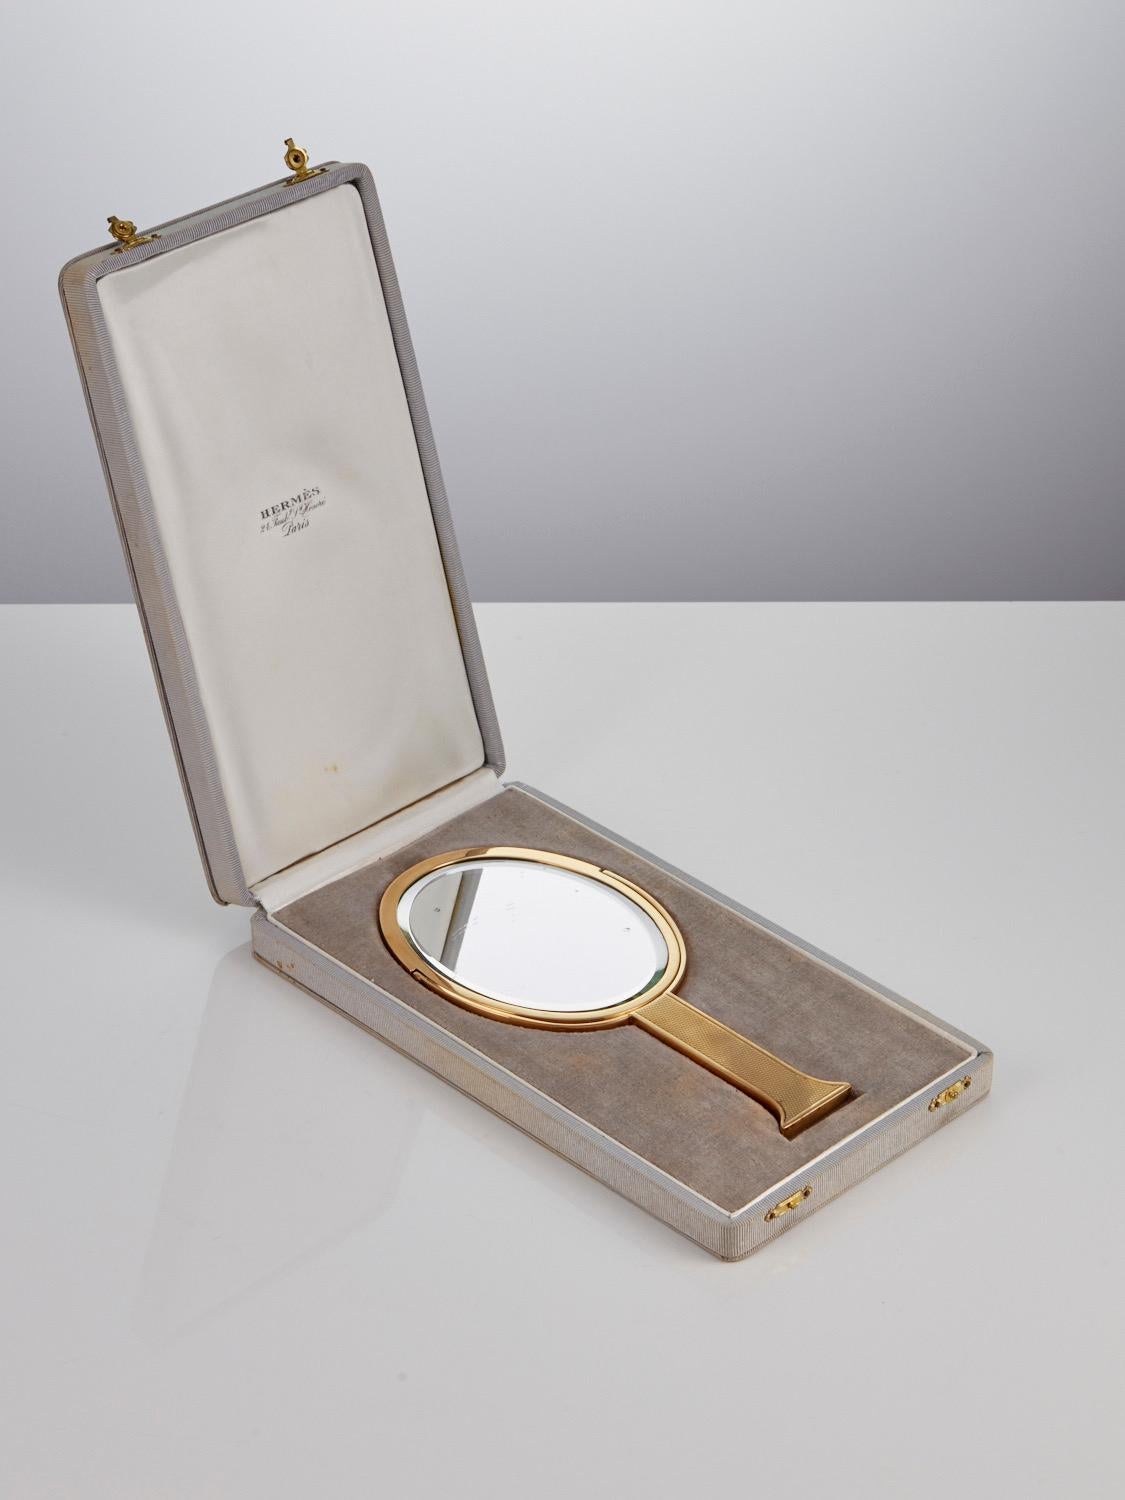 A Mid 20th century boxed Silver gilt Hermes hand mirror Marked Paris Date Circa 1950.

This charming and elegant Hermes hand-mirror has a pivoting bevel edged glass, one side flat, the other magnifying. 
The plate does show some signs of foxing